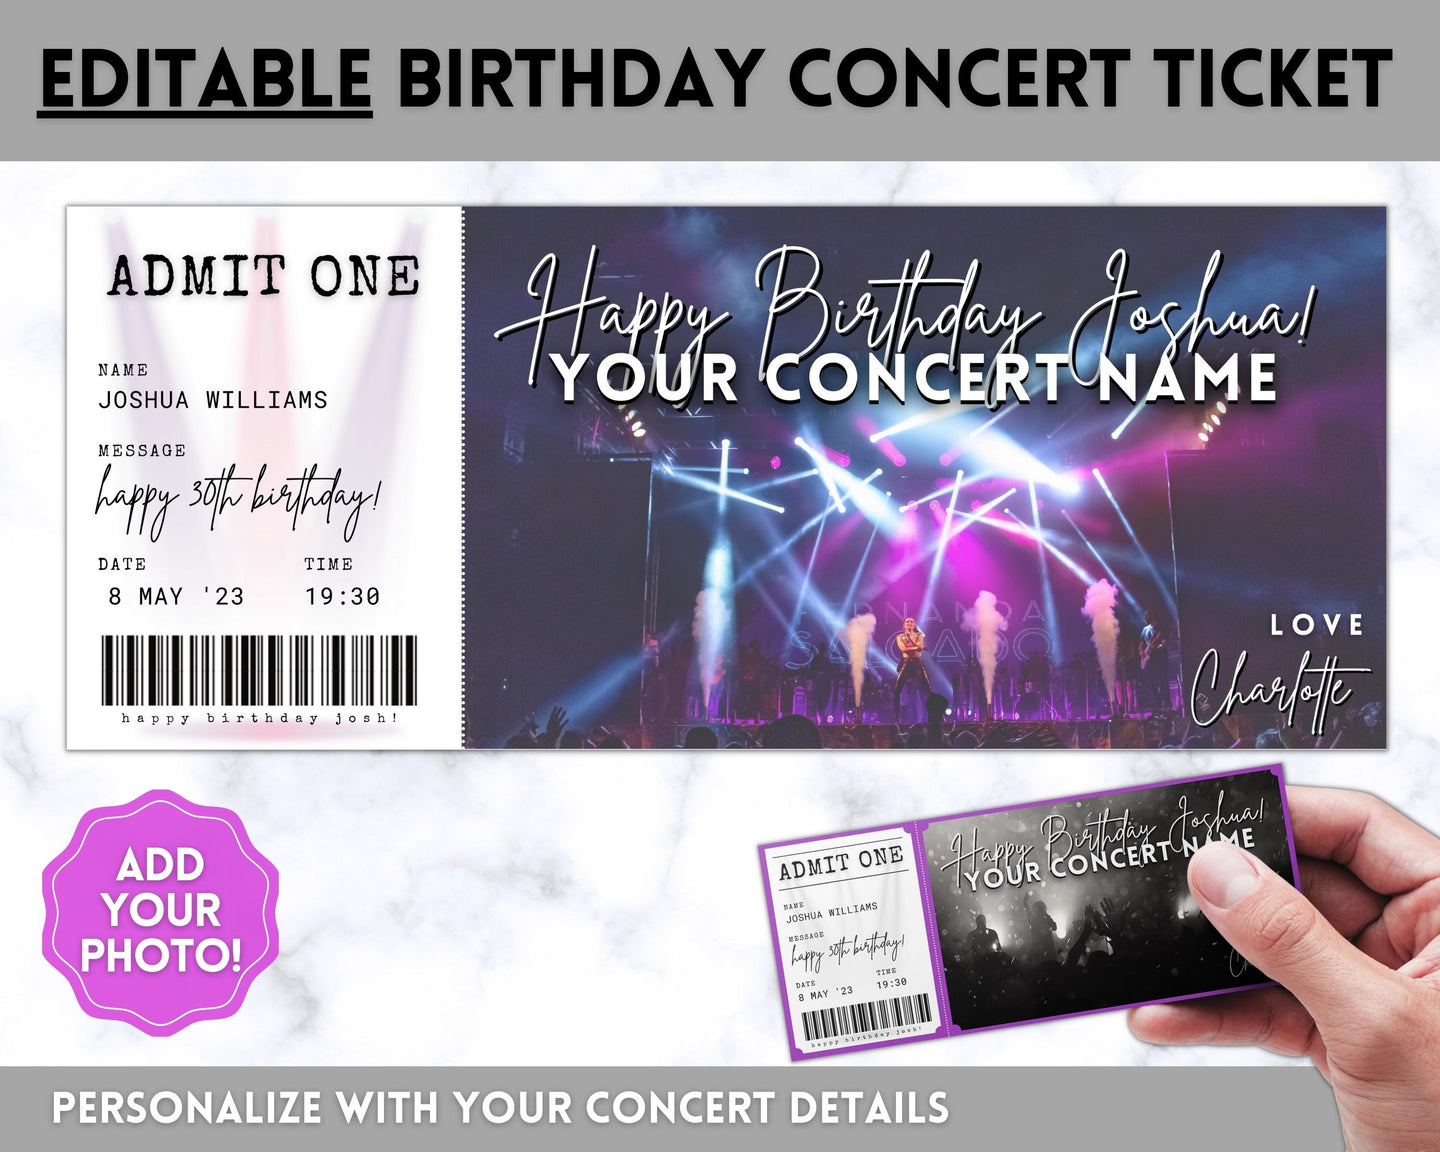 BIRTHDAY Concert Ticket Template | EDITABLE Surprise Getaway gift for Musical Events & Theatre Shows